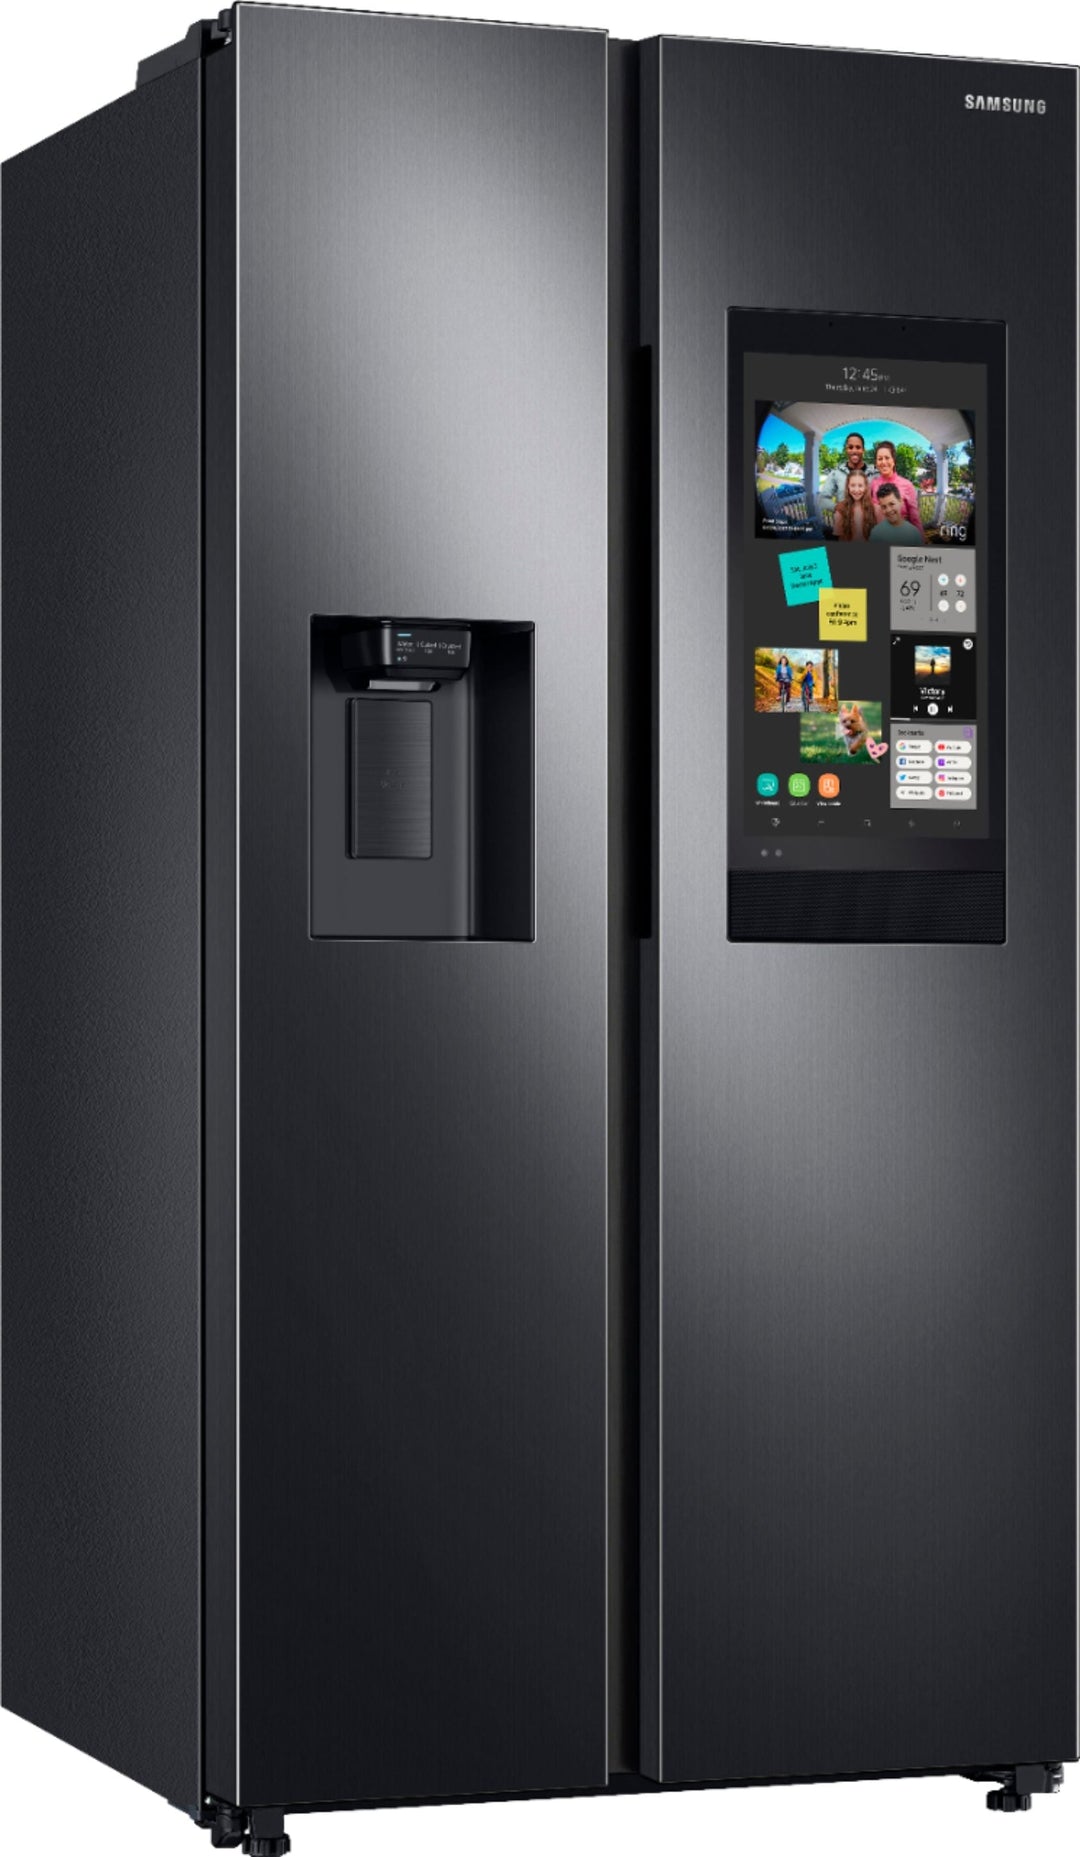 Samsung - 26.7 cu. ft. Side-by-Side Smart Refrigerator with 21.5" Touch-Screen Family Hub - Black Stainless Steel